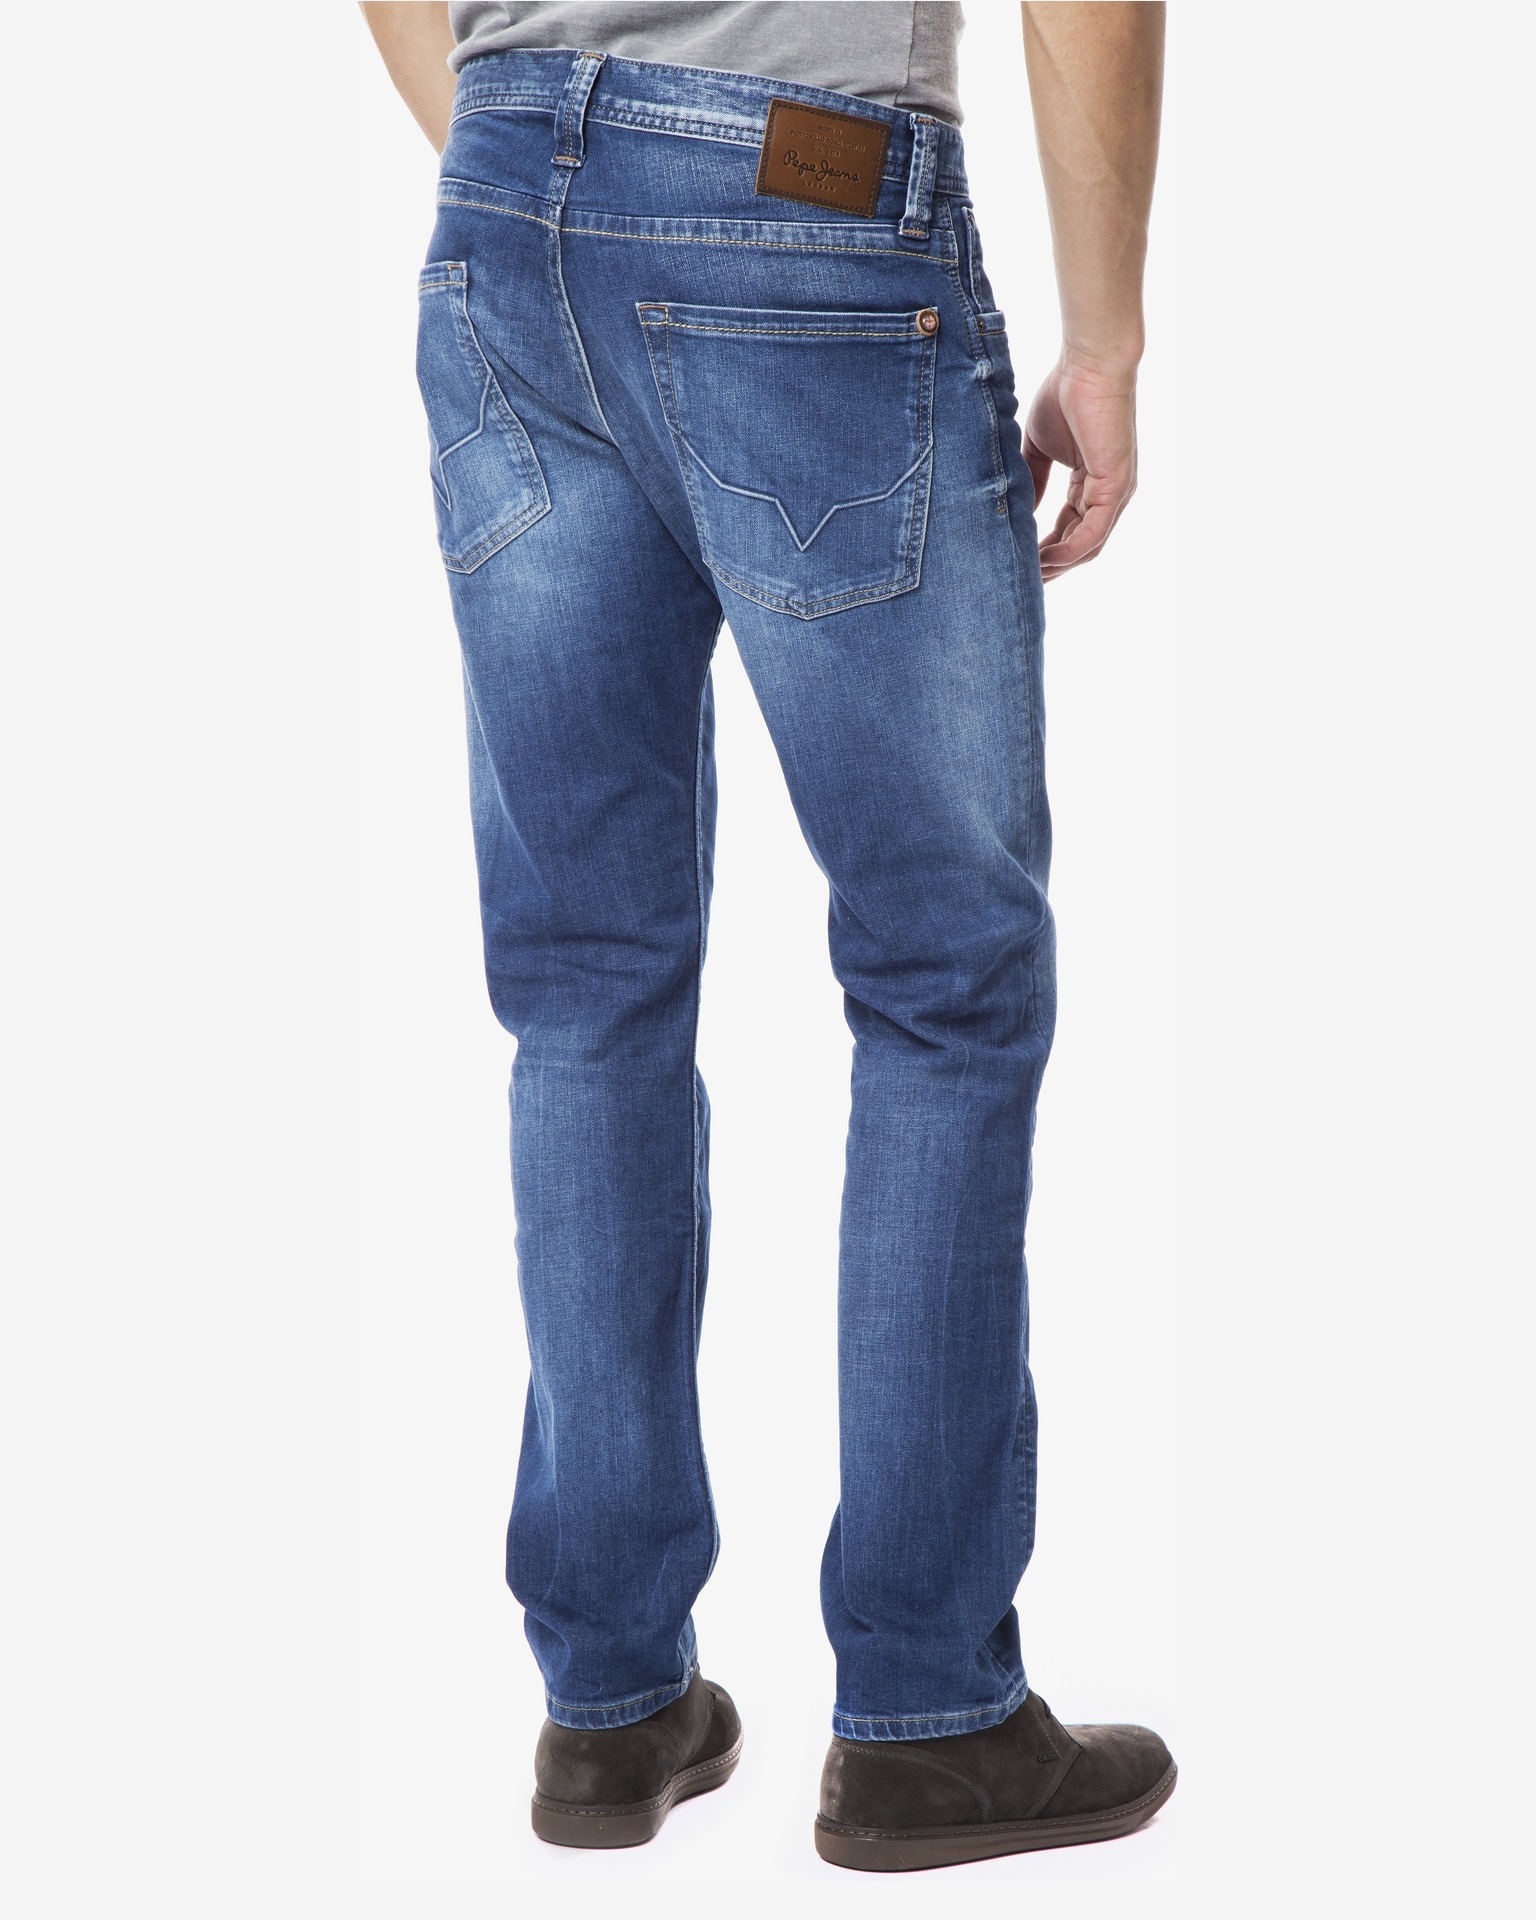 buy branded jeans online at lowest price